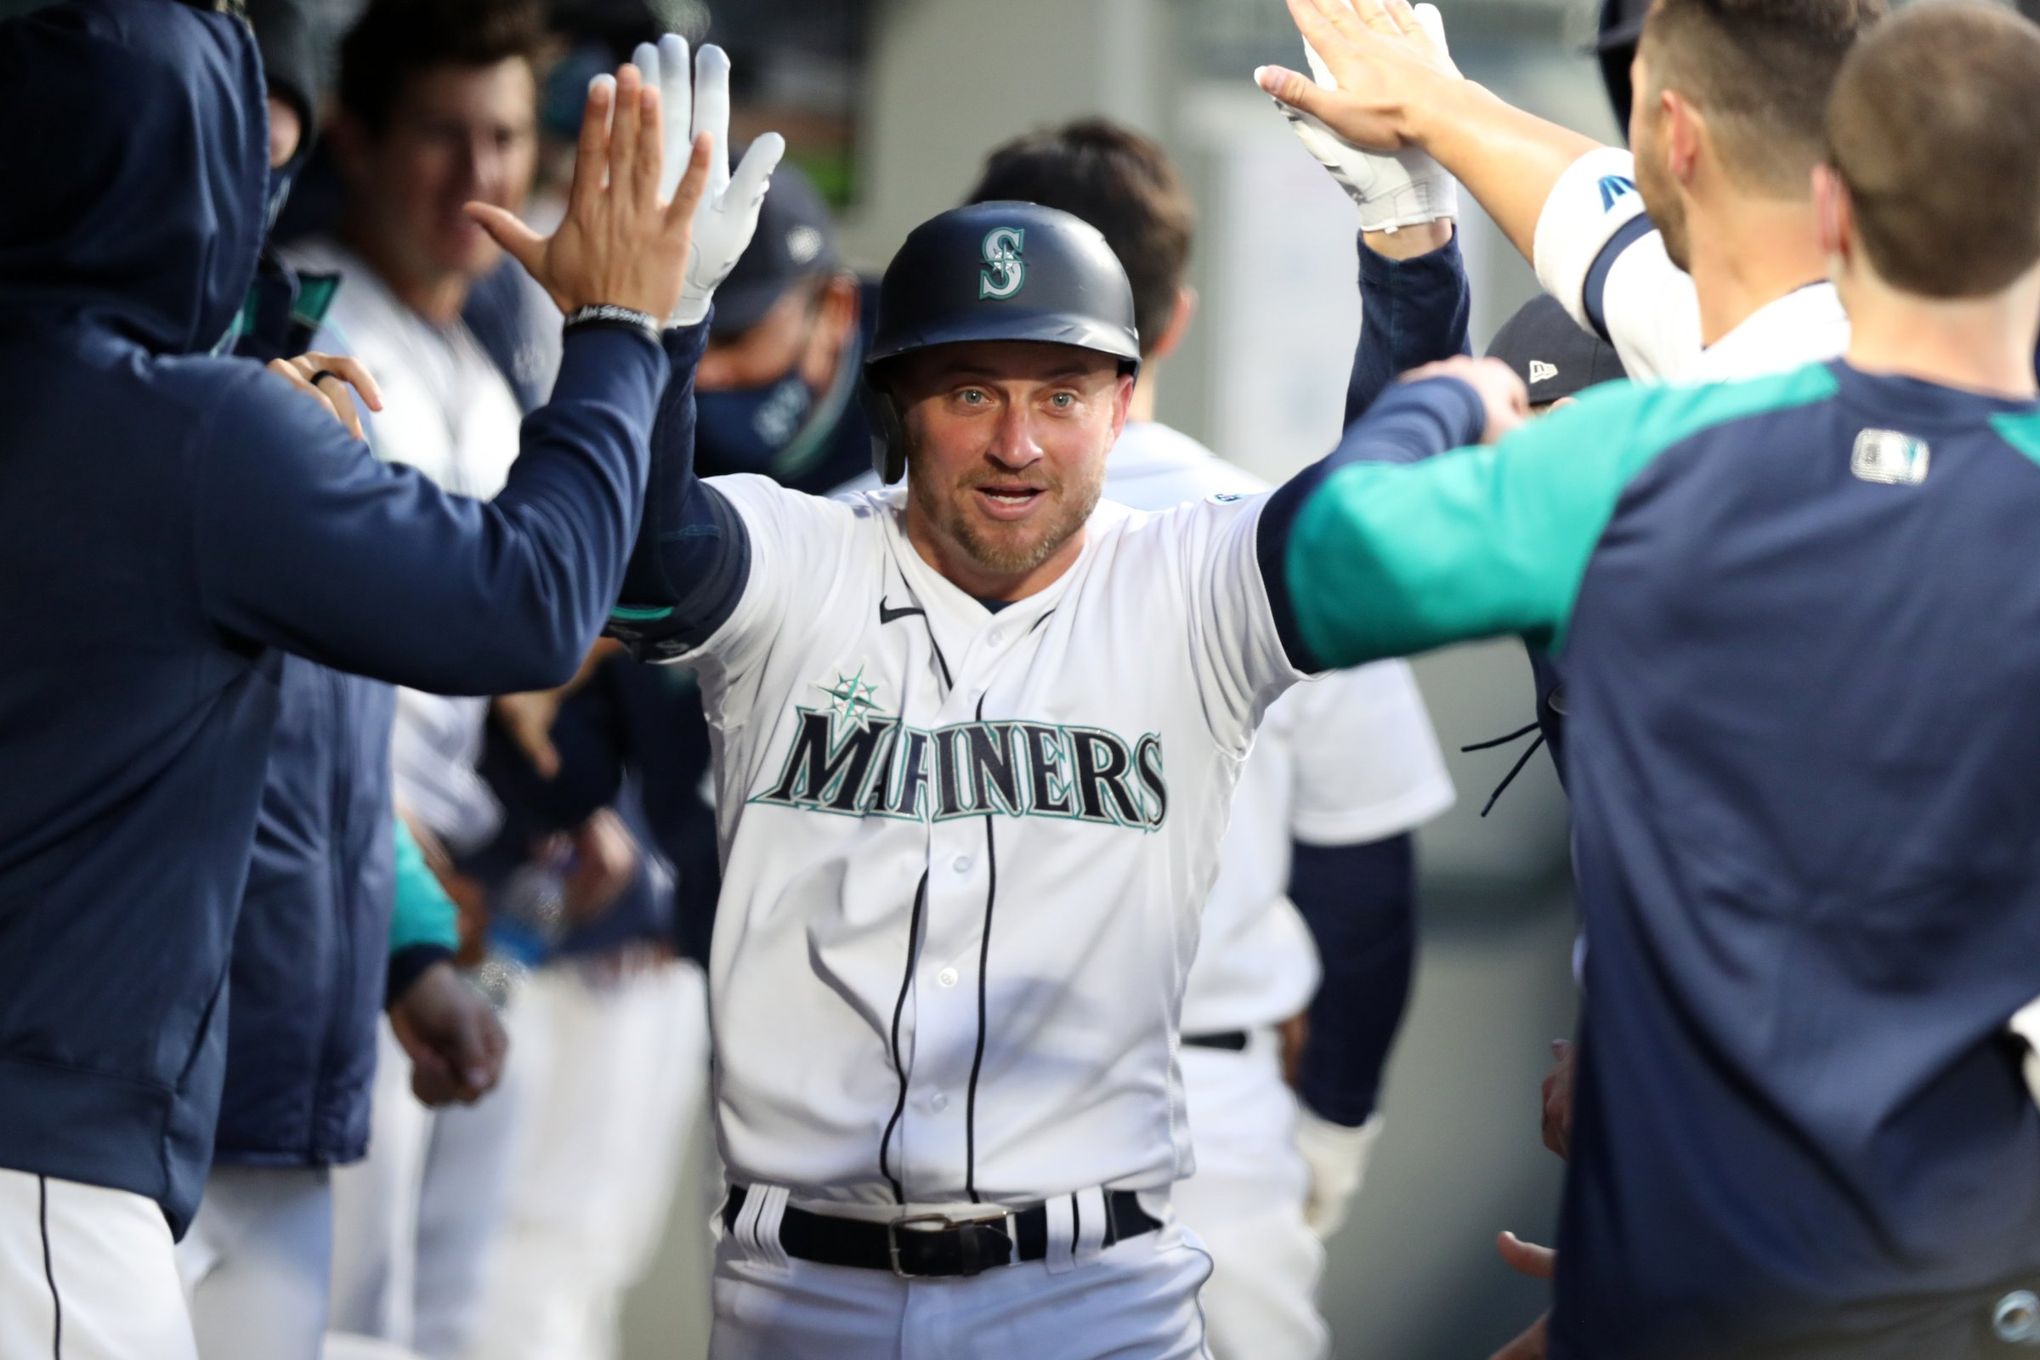 Seattle Mariners: The underappreciated Kyle Seager - Tar Heel Times - 9/6/ 2021